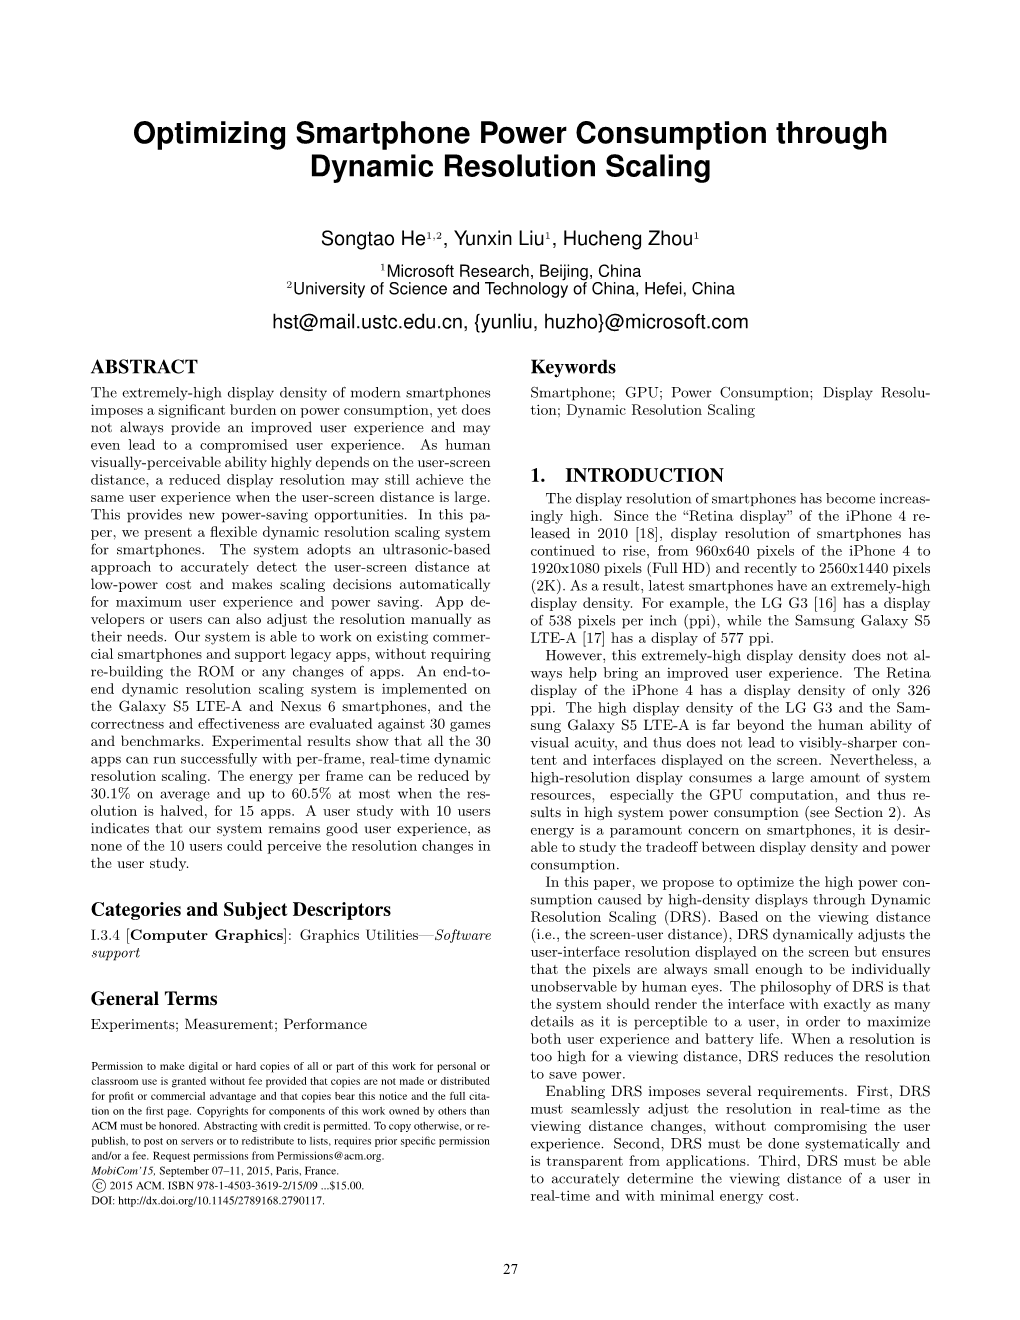 Optimizing Smartphone Power Consumption Through Dynamic Resolution Scaling